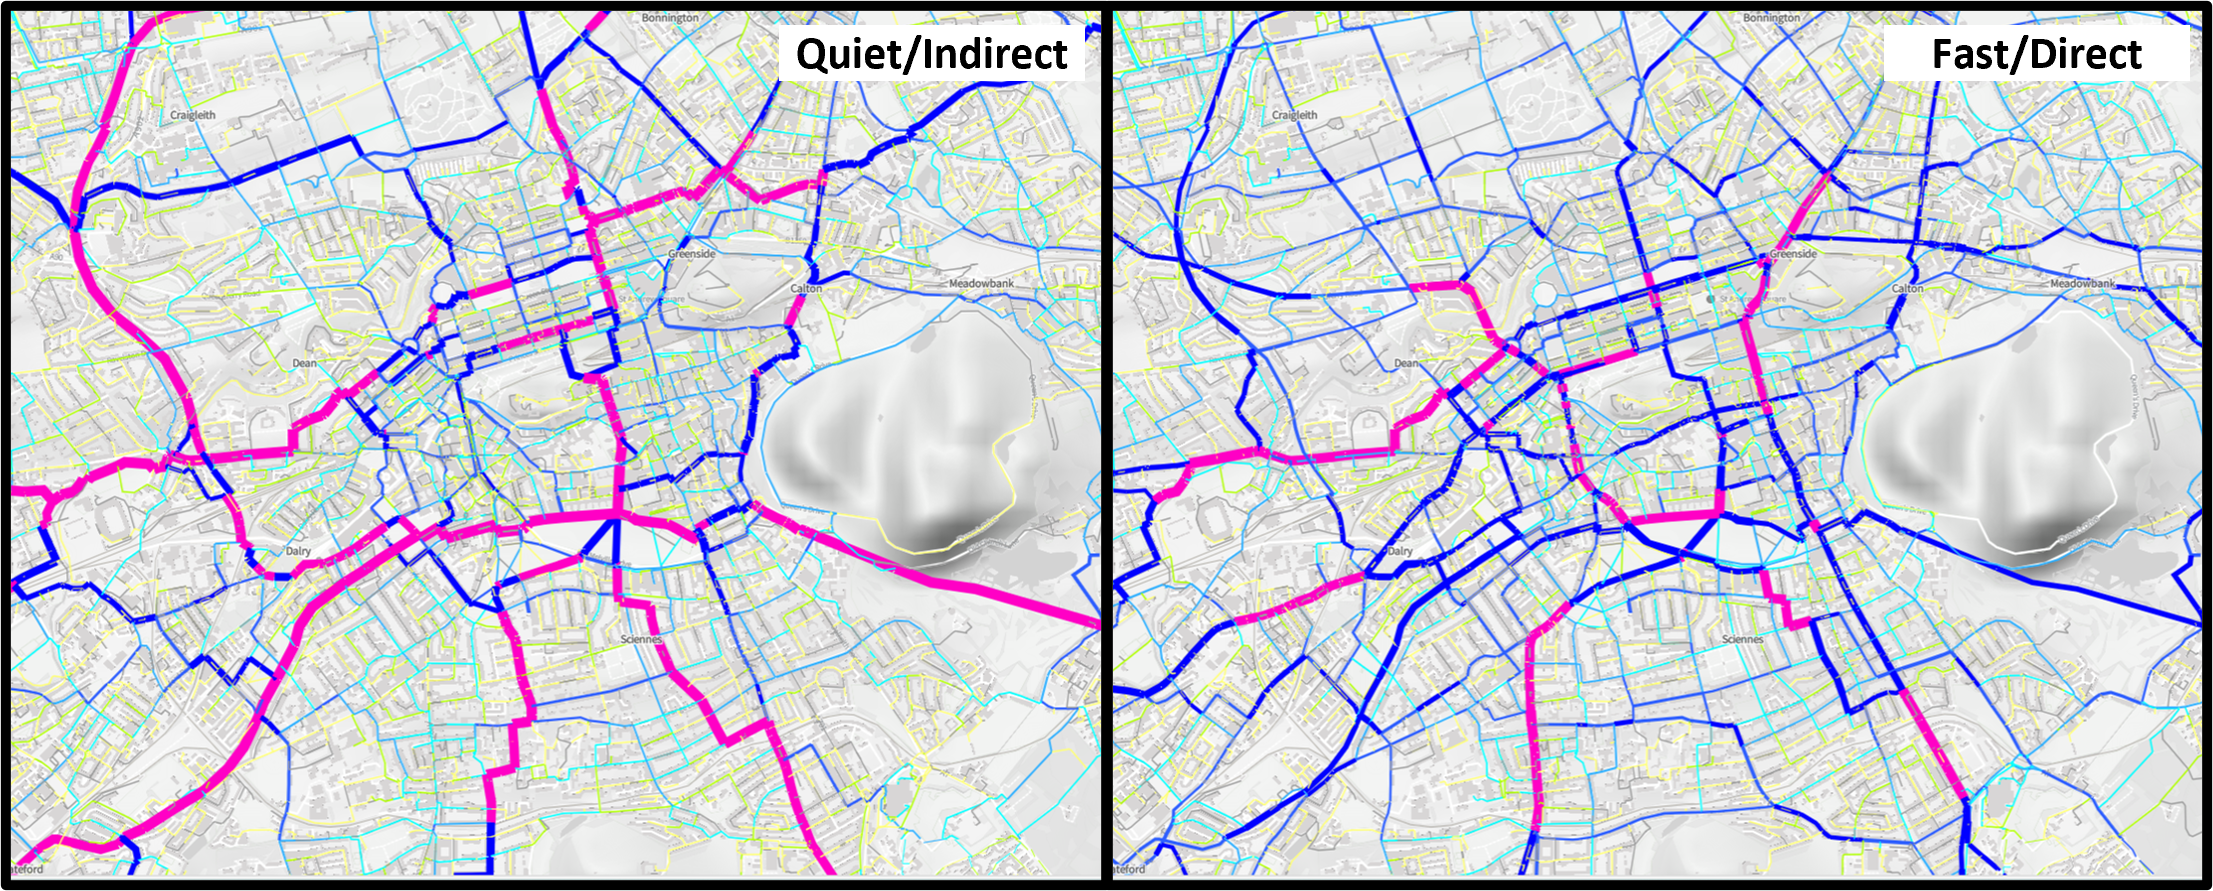 Route network types